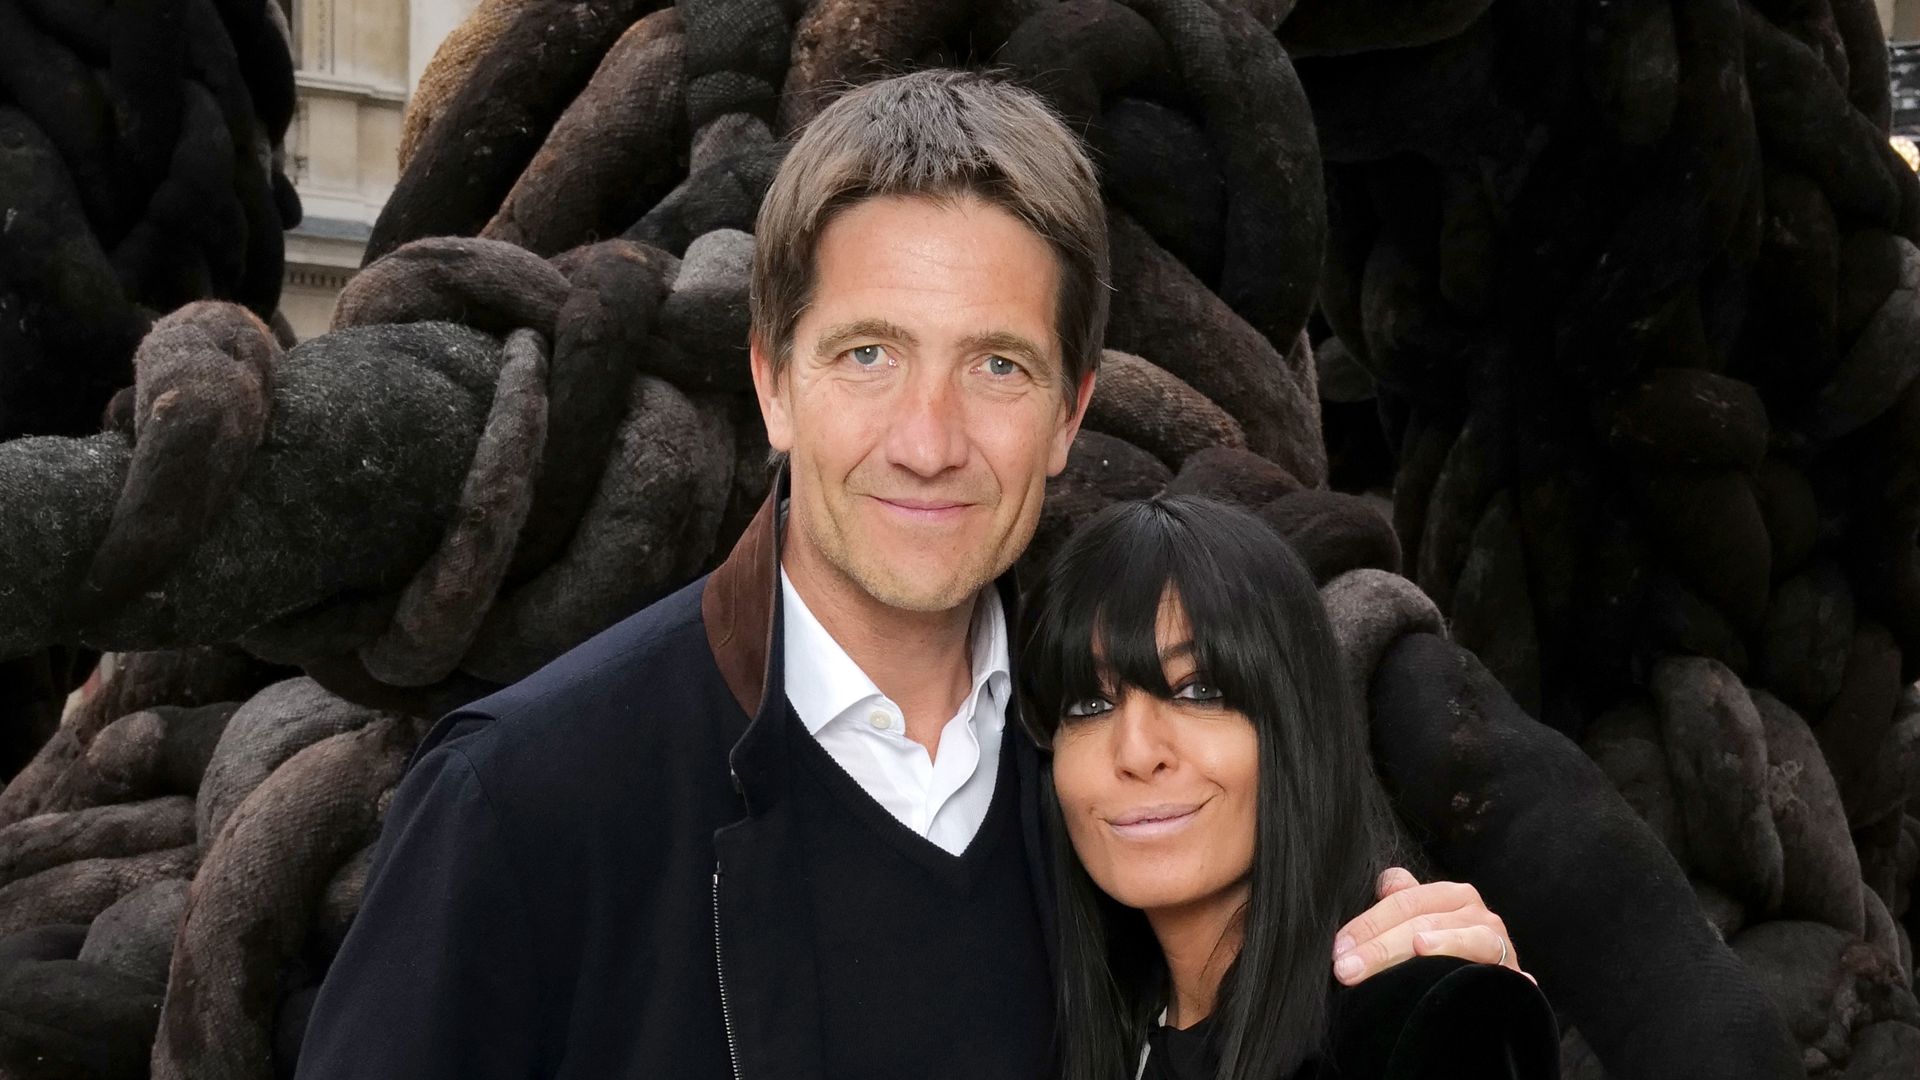 Strictly's Claudia Winkleman enjoys star-studded night out with husband Kris Thykier in London